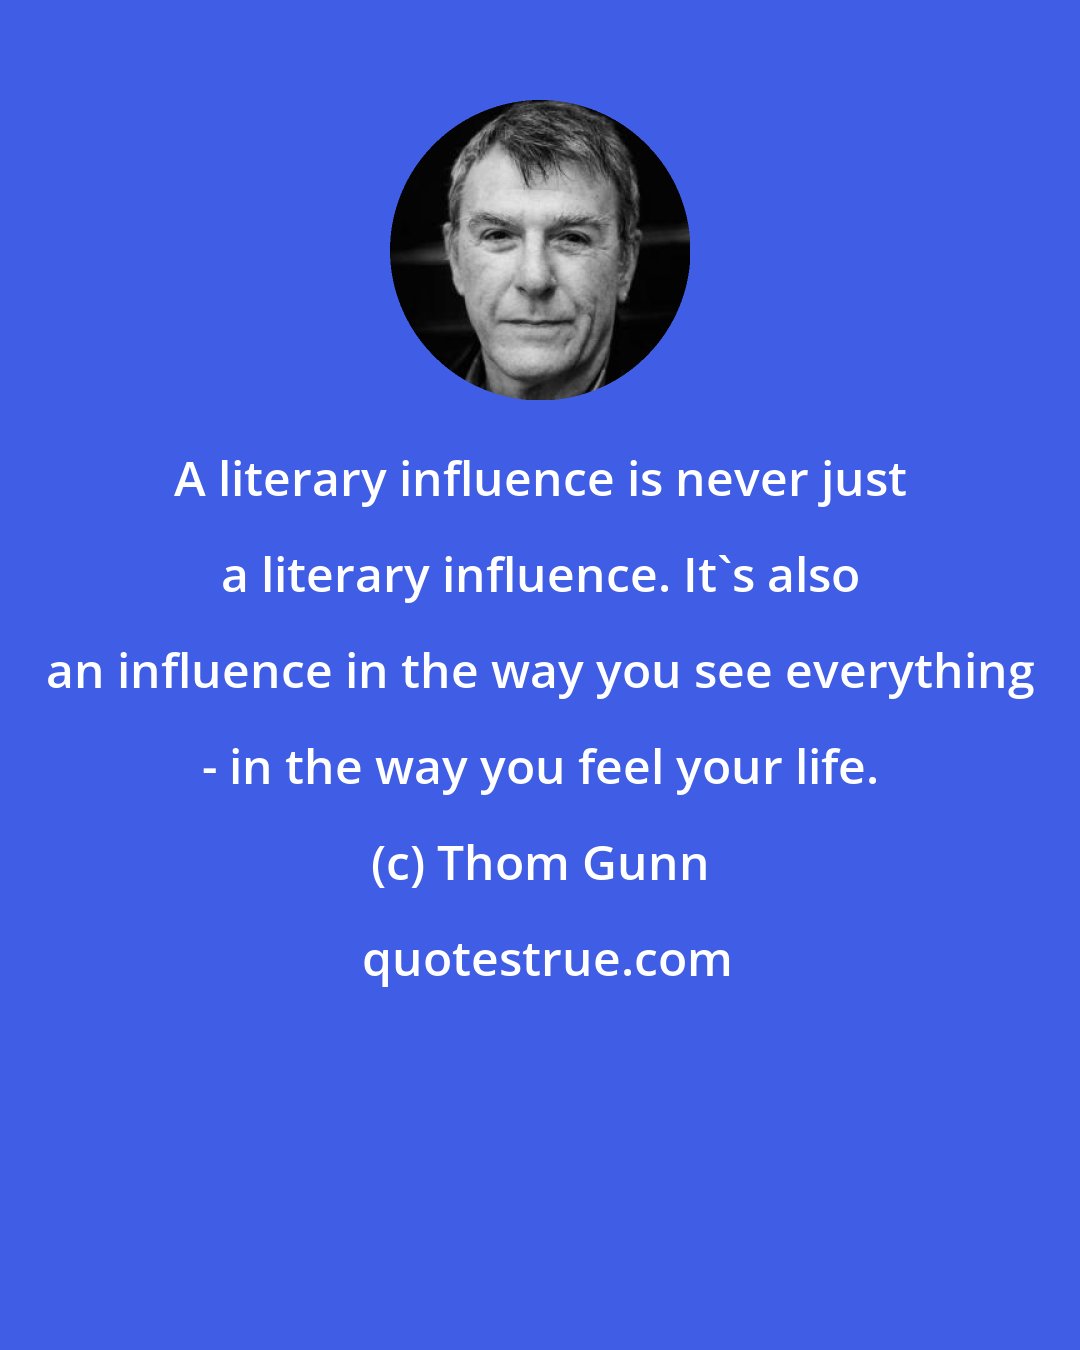 Thom Gunn: A literary influence is never just a literary influence. It's also an influence in the way you see everything - in the way you feel your life.